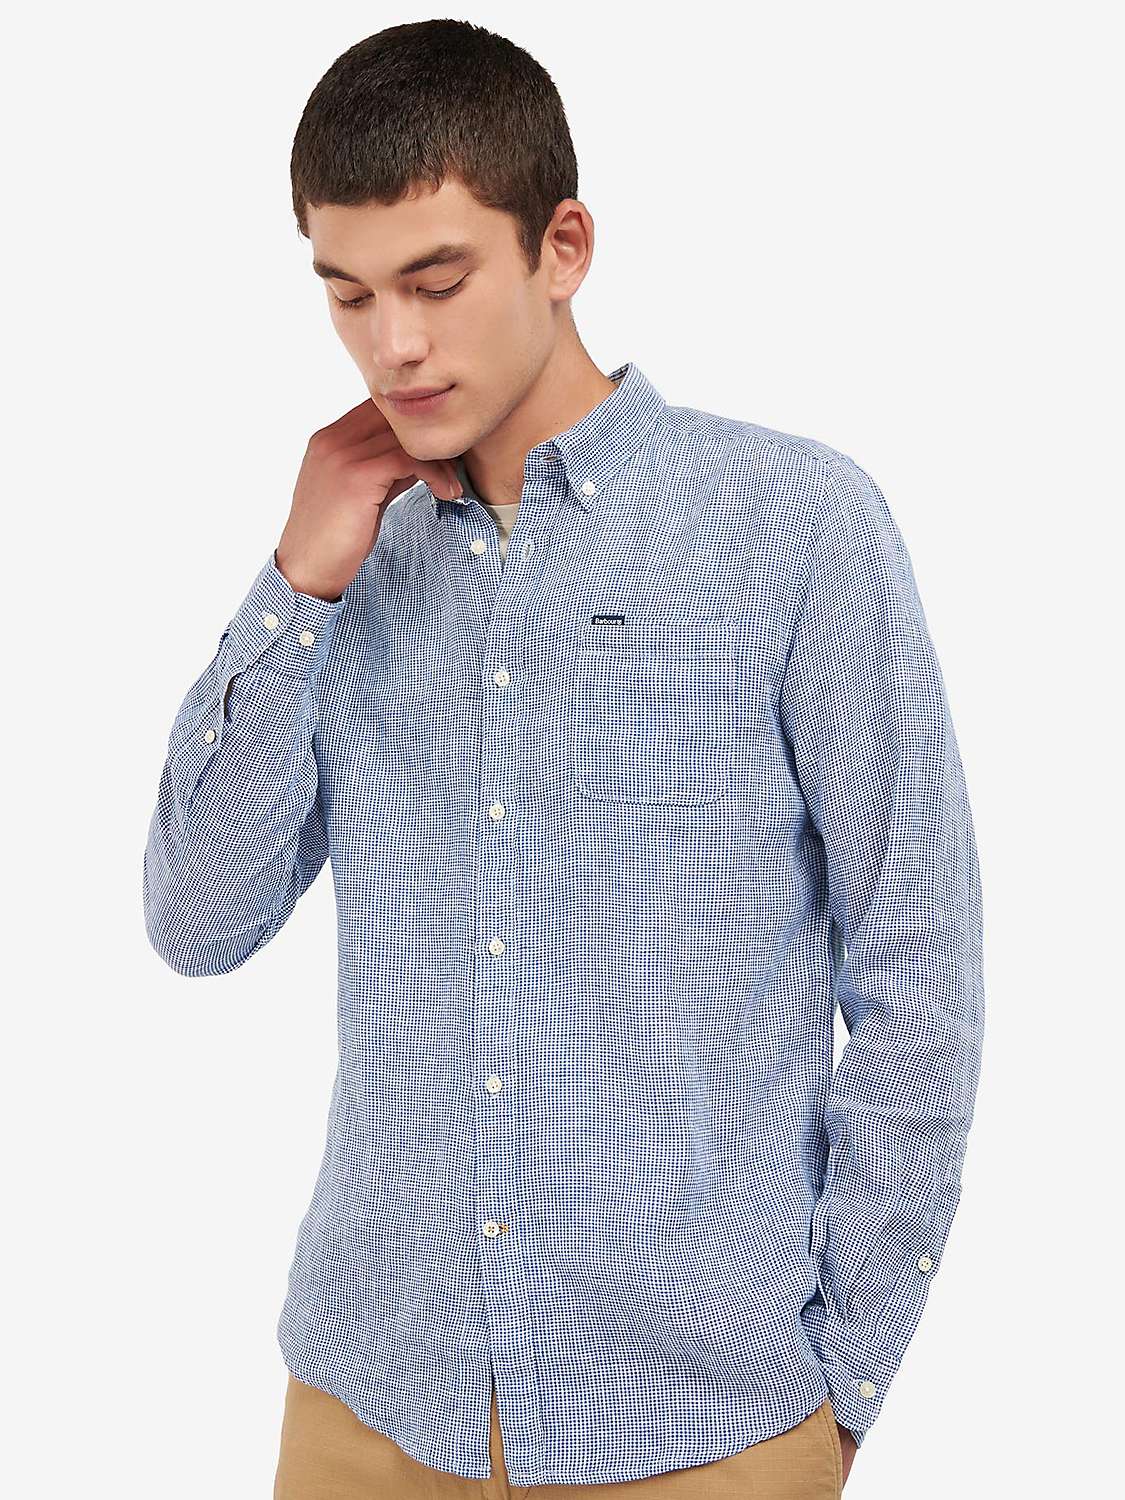 Buy Barbour Linton Tailored Shirt, Navy Online at johnlewis.com